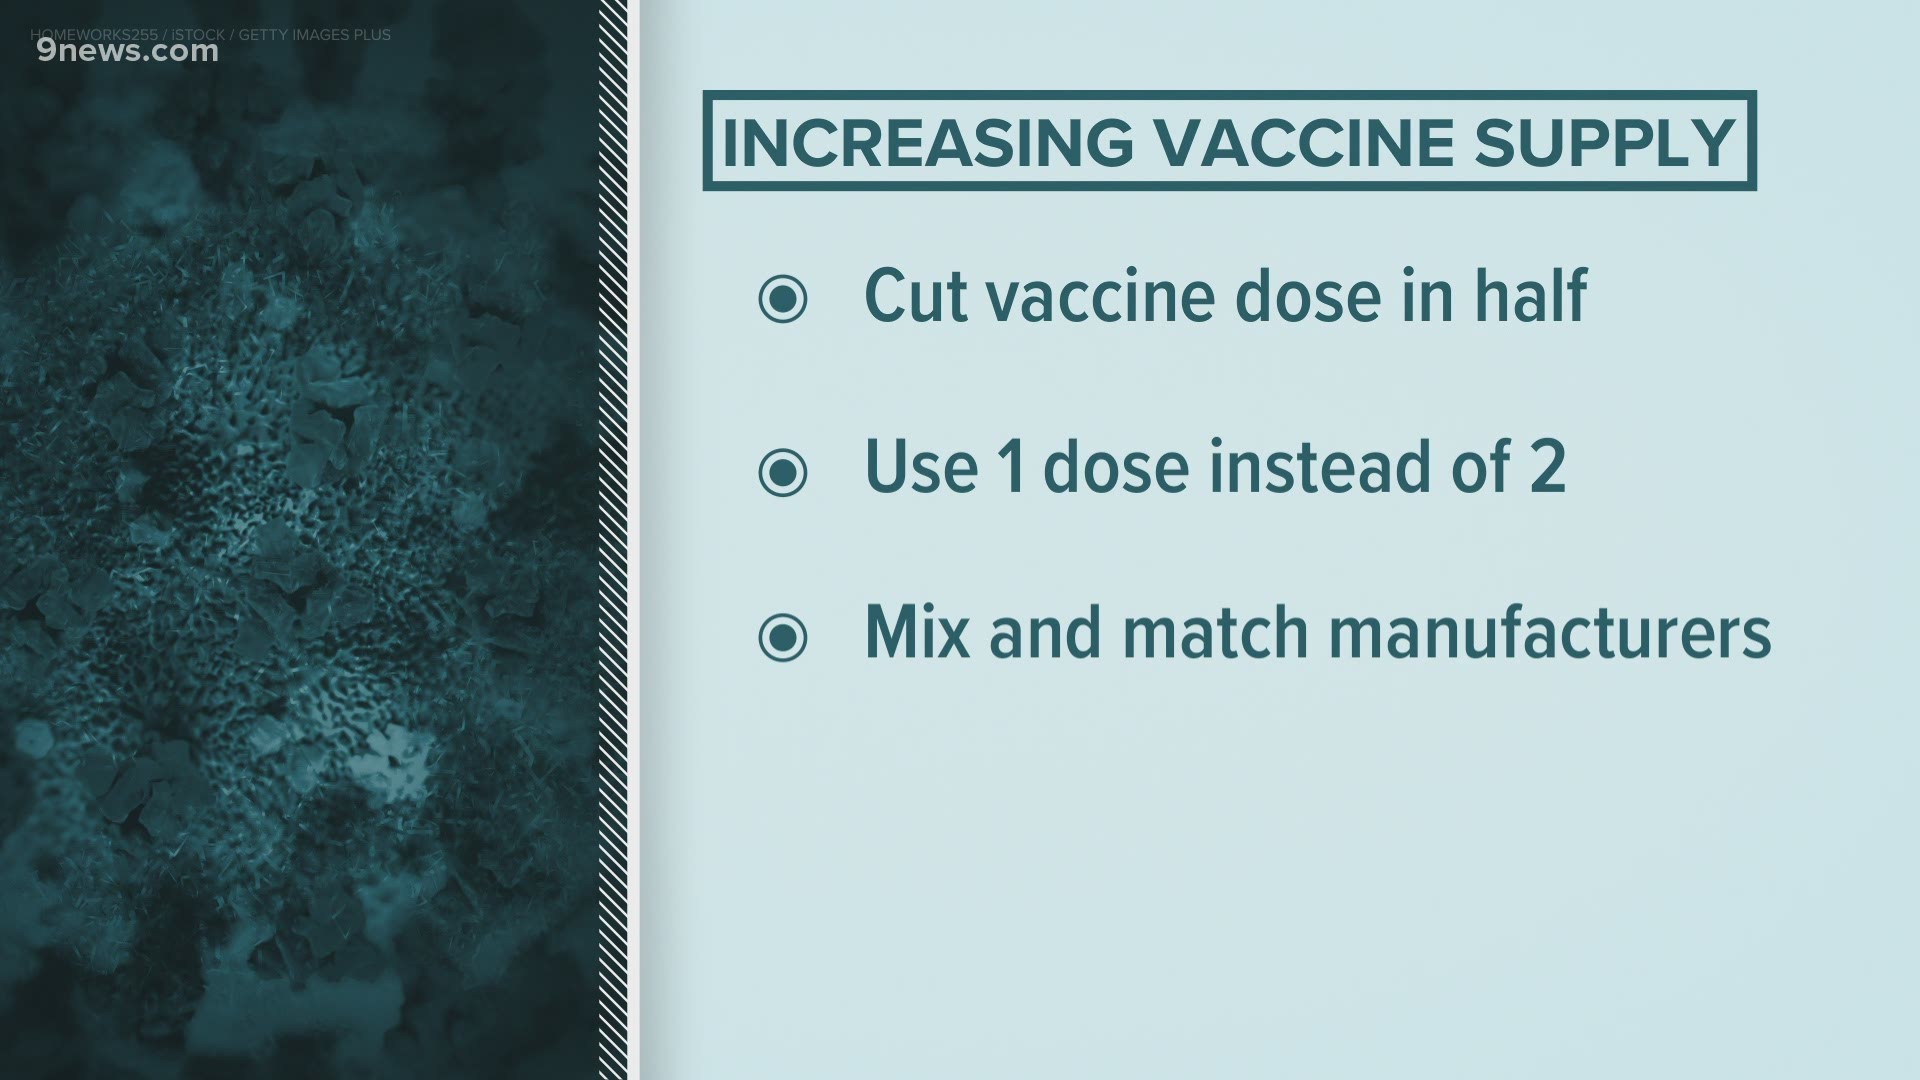 9Health Expert Dr. Payal Kohli talked about the pros and cons of strategies to increase the vaccine supply.